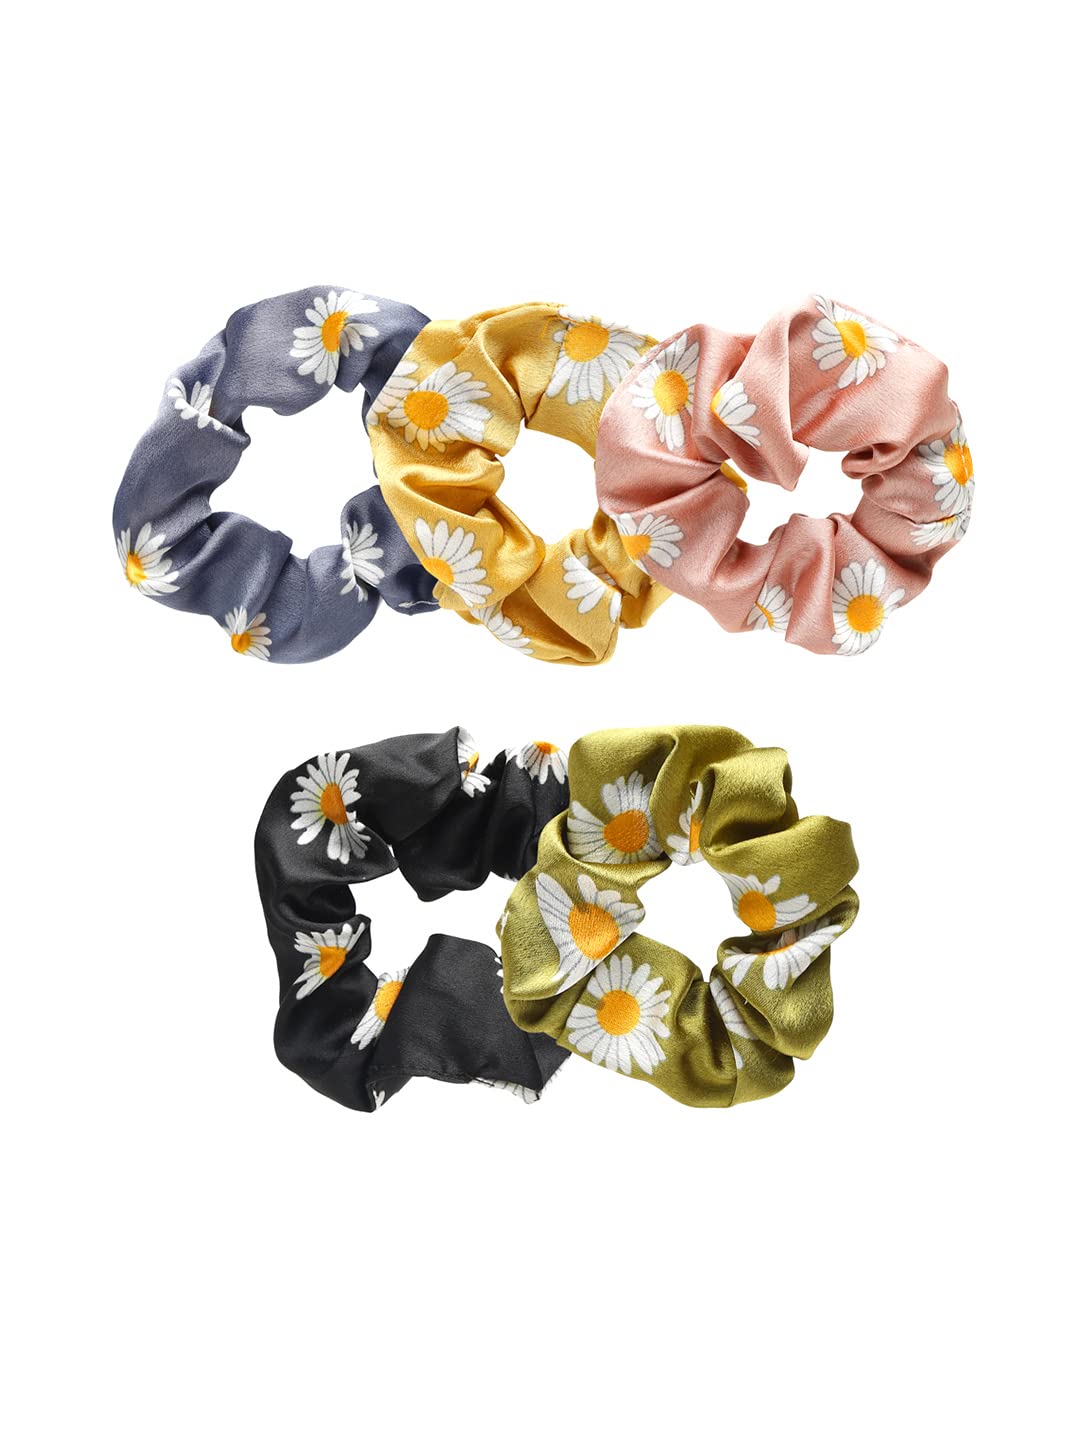 Yellow Chimes Scrunchies for Women Hair Accessories for Women 5 Pcs Satin Scrunchies Set Floral Print Rubber Bands Multicolor Scrunchie Ponytail Holders Hair Ties for Women and Girls Gifts for Women and Girls